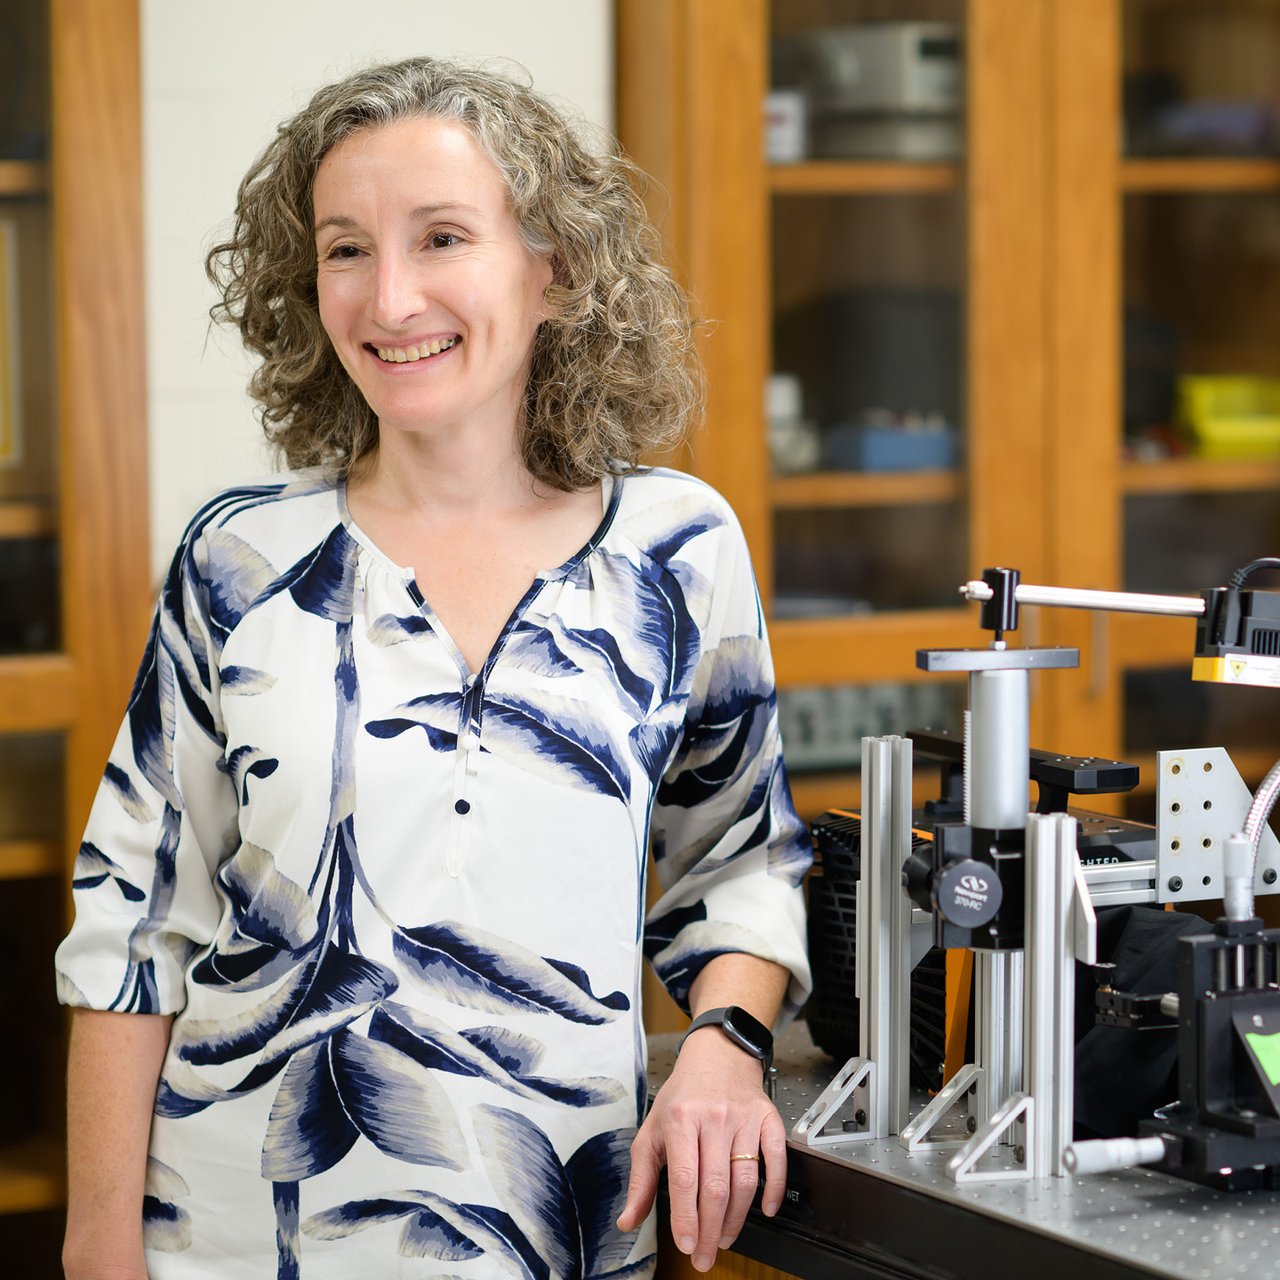 Duke Professor Shelia Patek smiling and looking off-center, leaning against a table with microscope in the background.